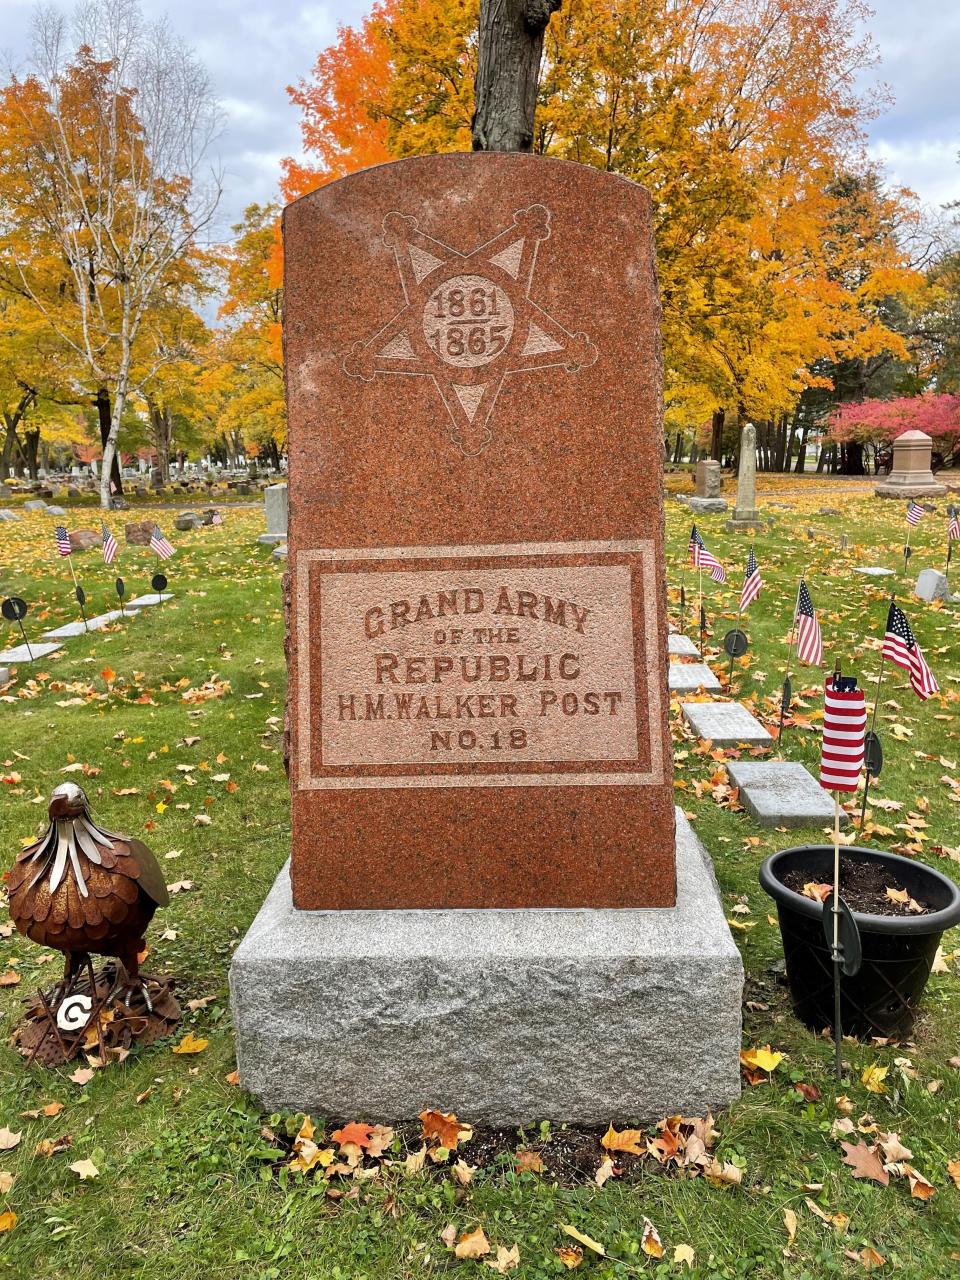 The Civil War Grand Army of the Republic marker at Evergreen Cemetery in Manitowoc after a gravestone cleaning in 2021.